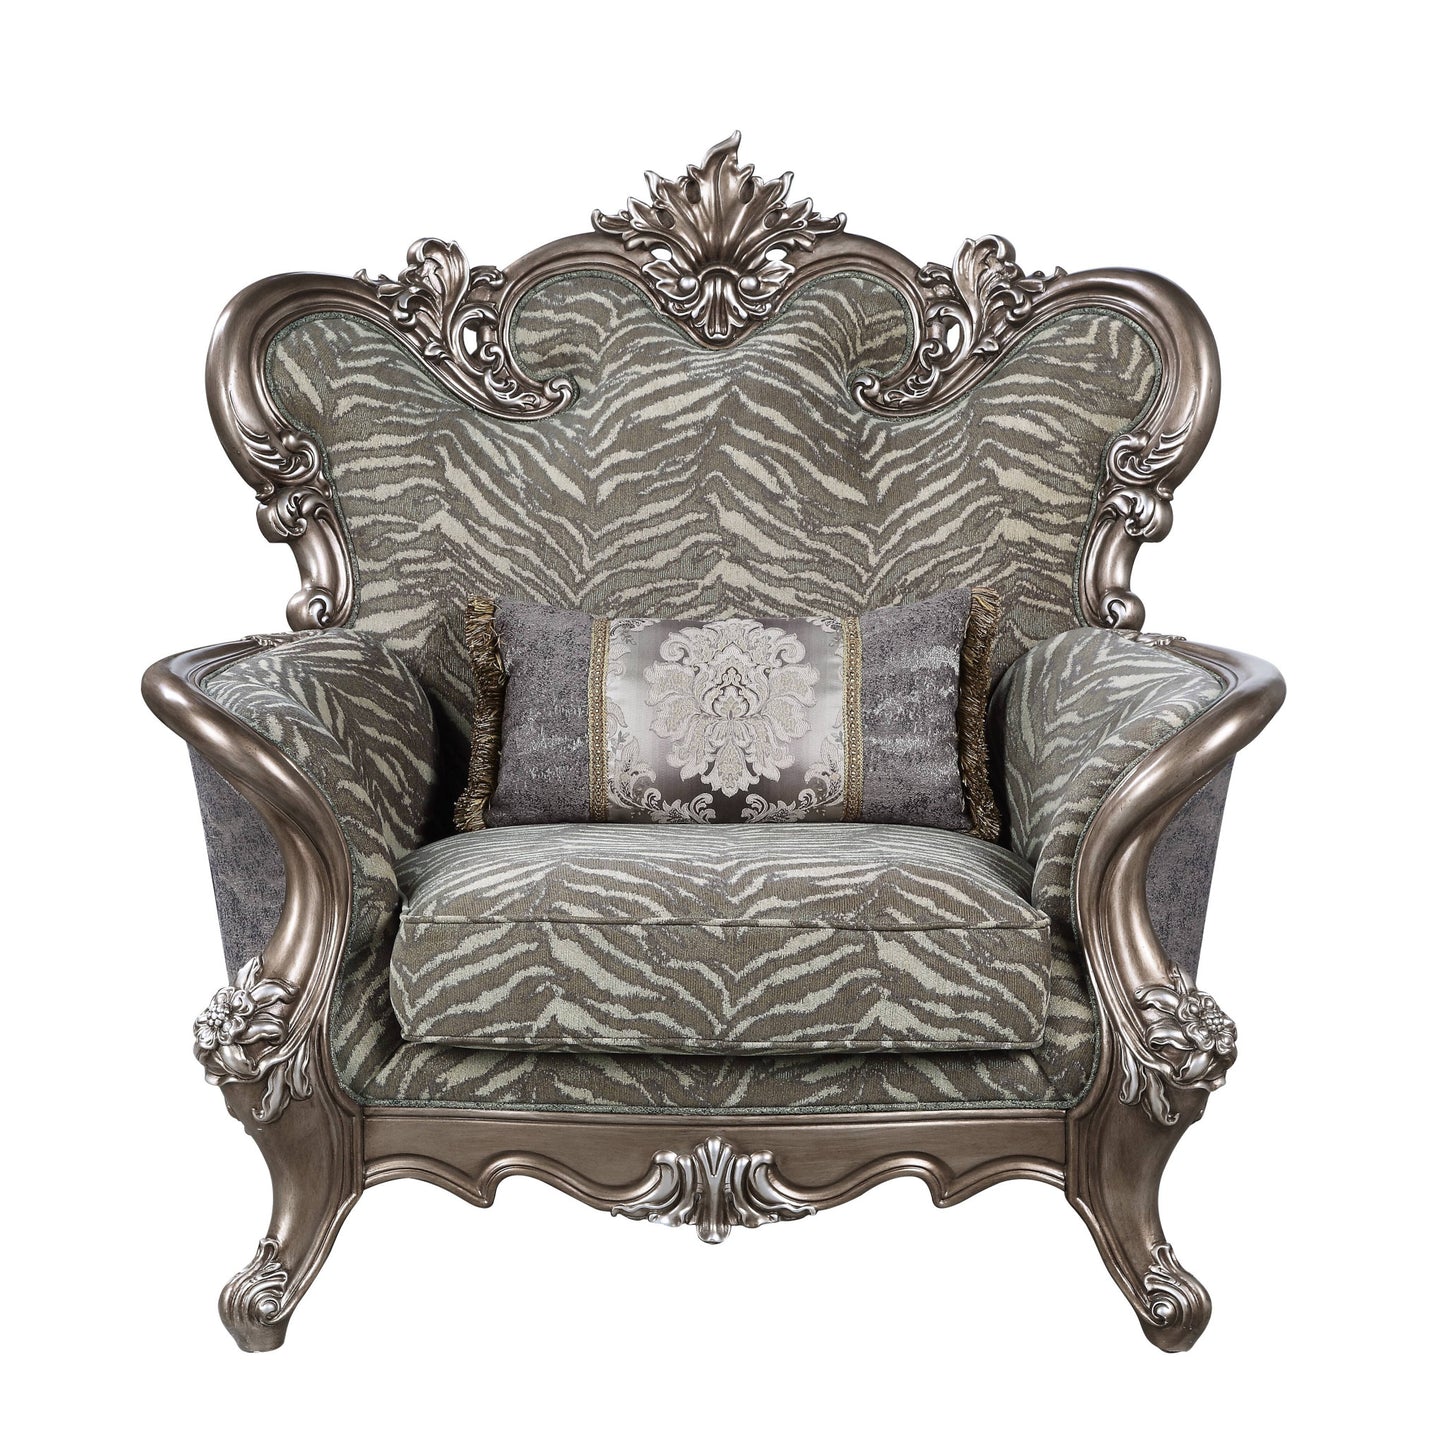 47" Gray Fabric And Antique Bronze Floral Tufted Wingback Chair